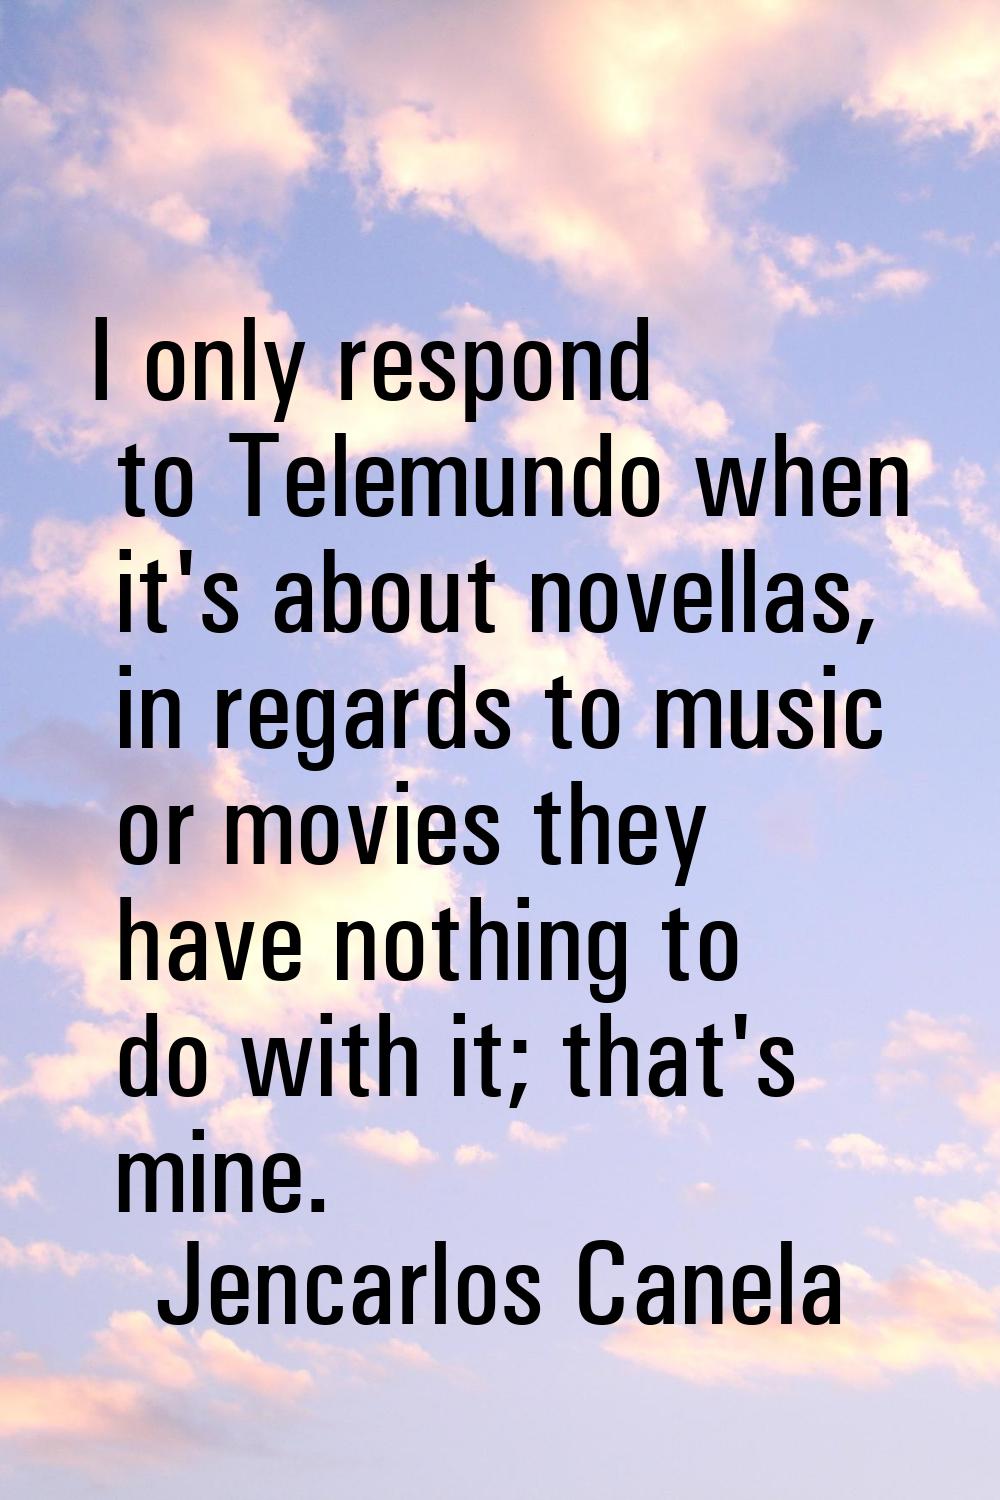 I only respond to Telemundo when it's about novellas, in regards to music or movies they have nothi